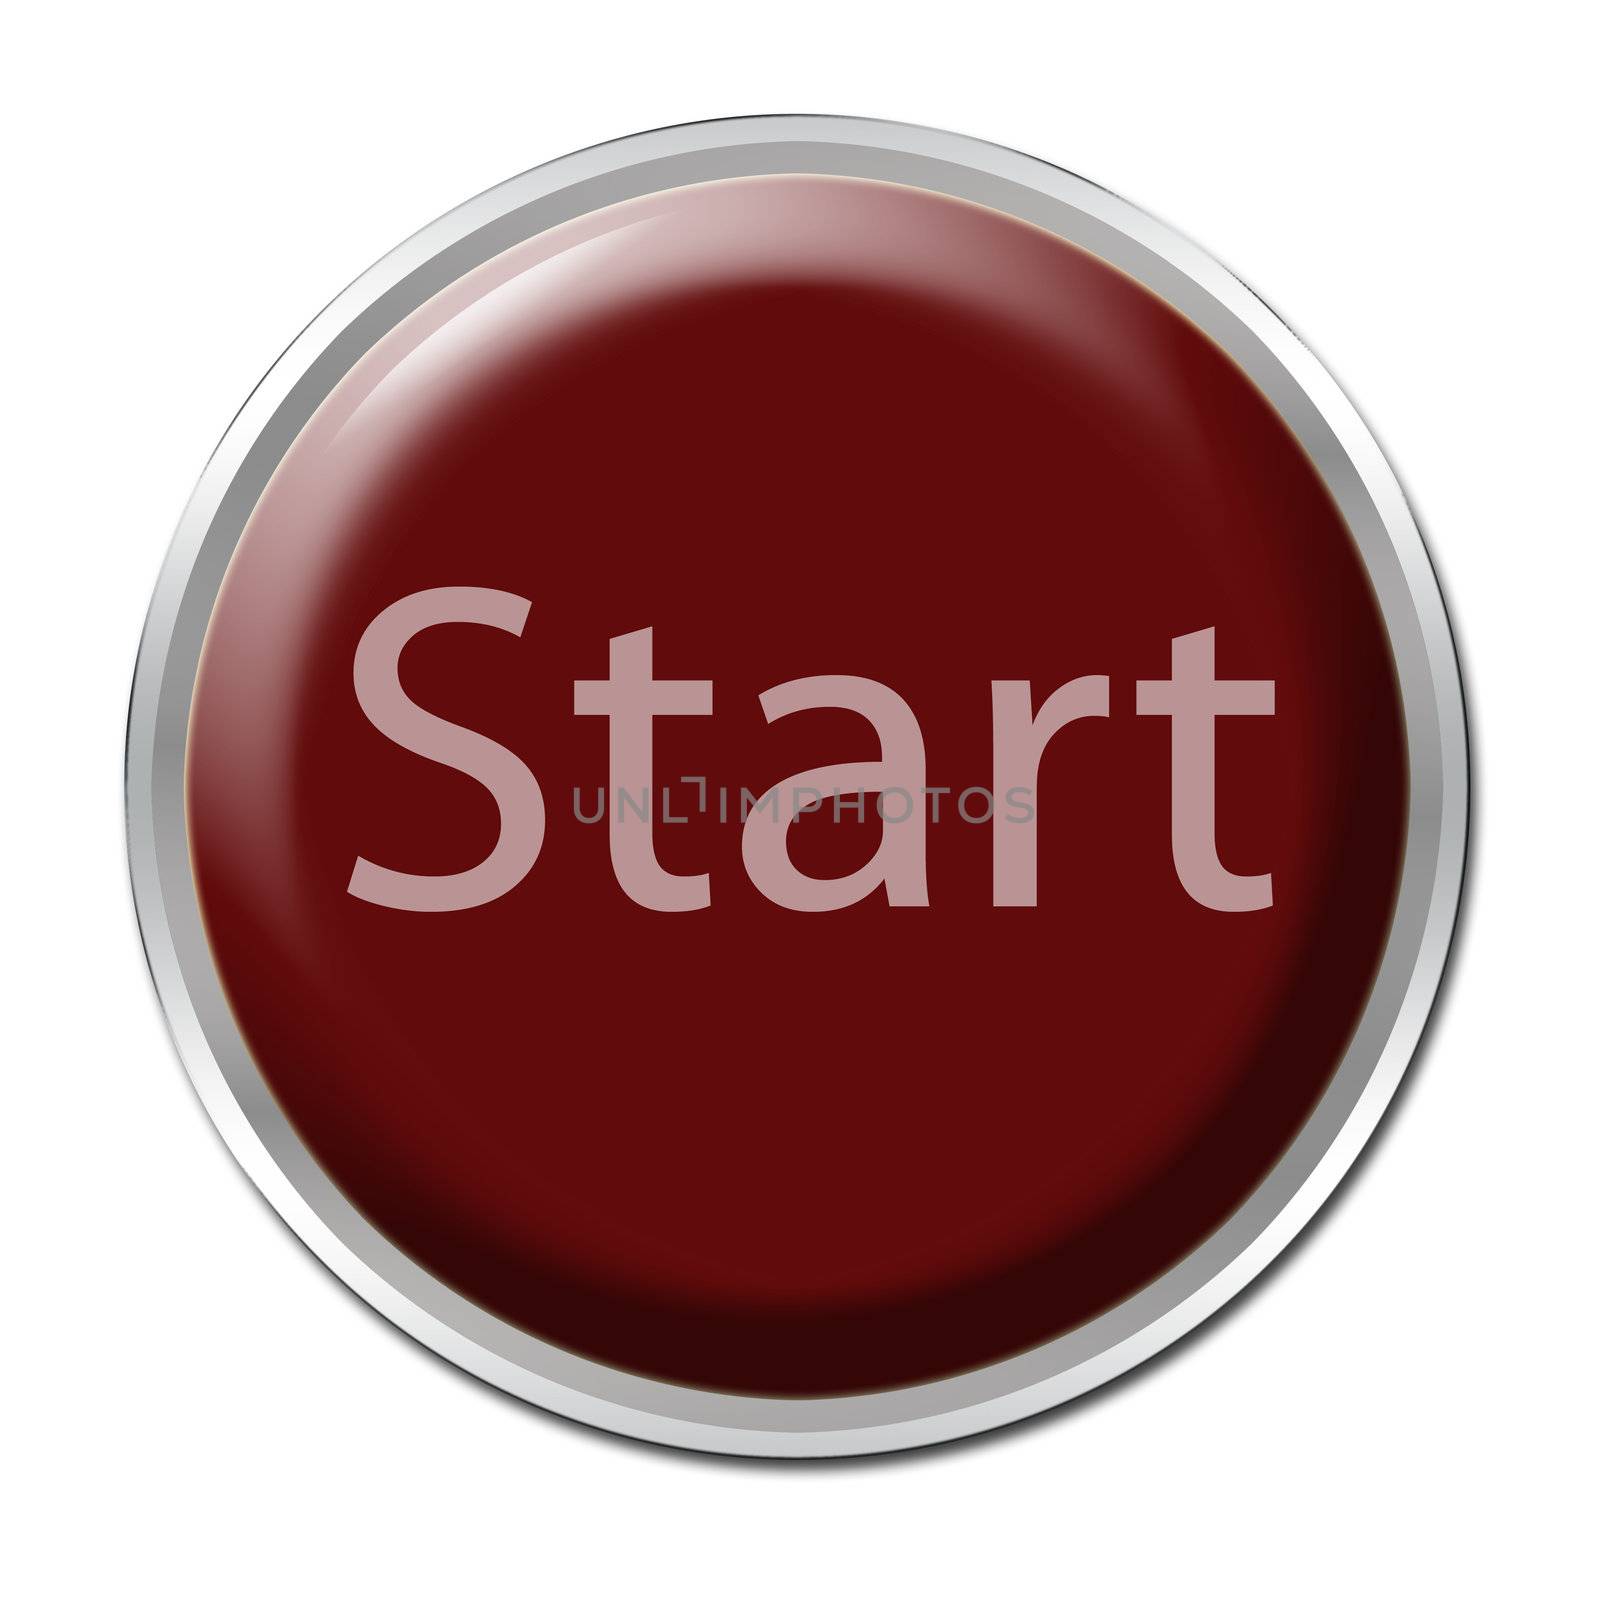 Red button with the word "Start"